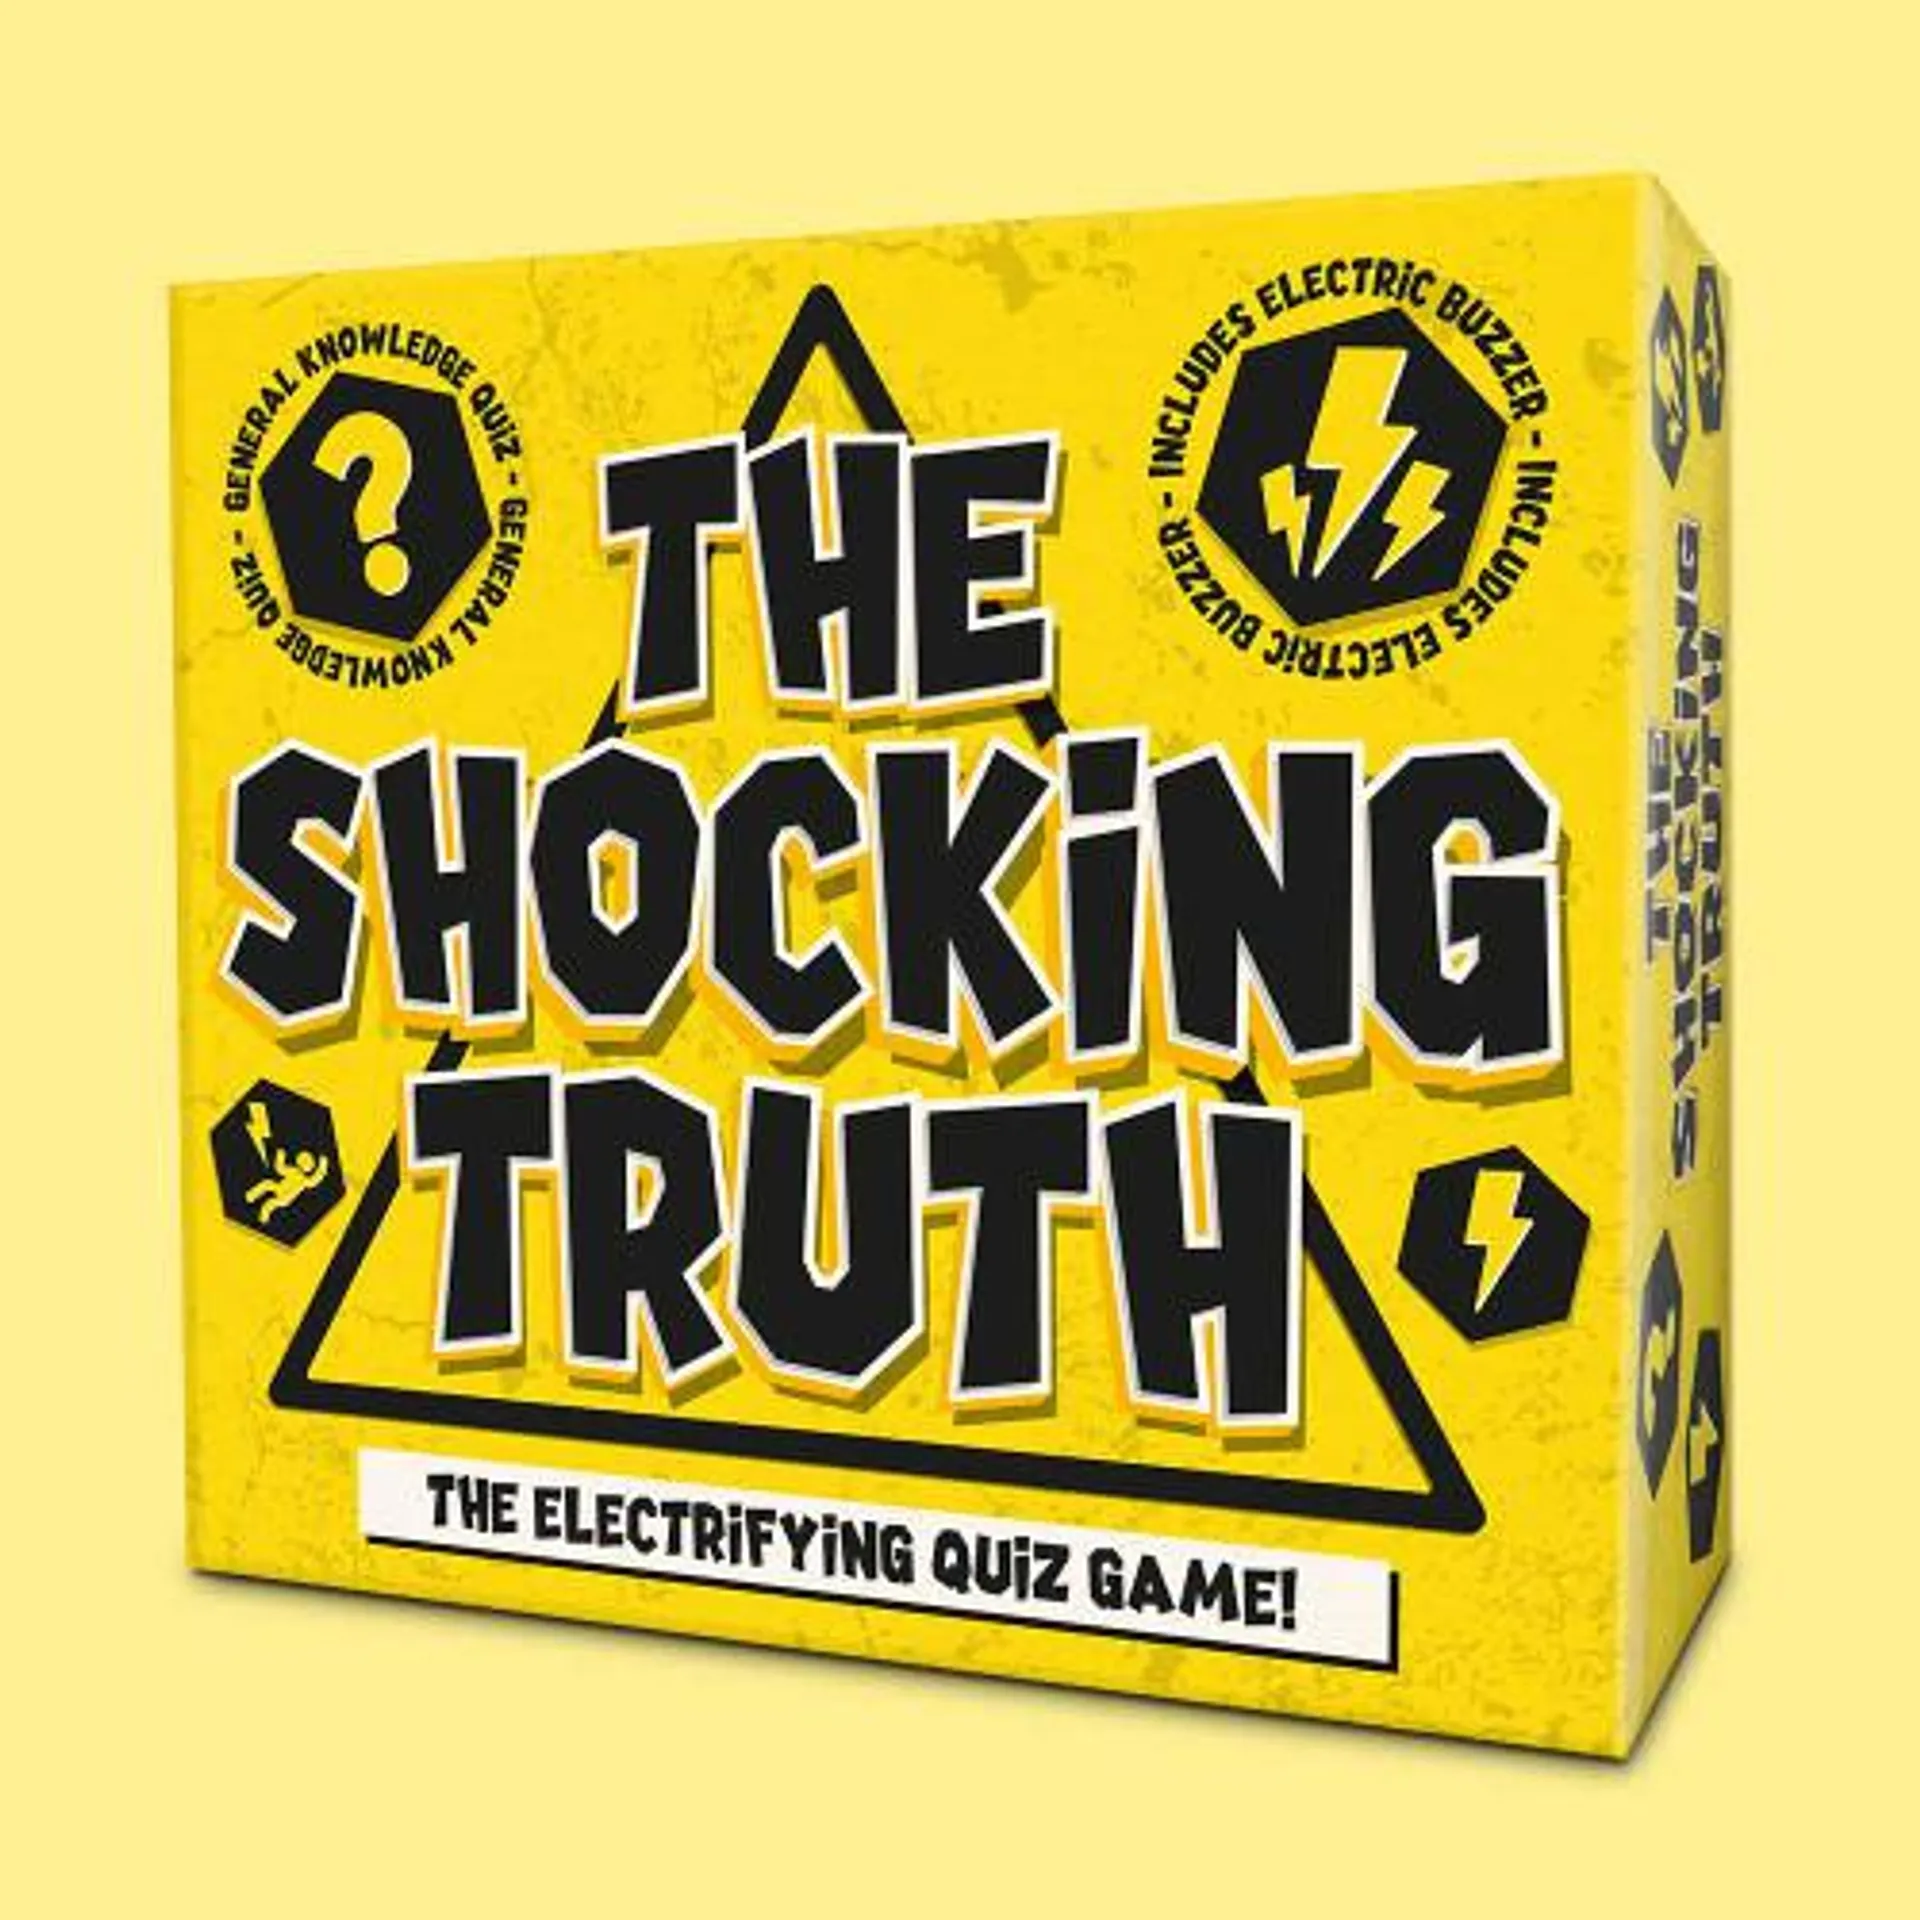 The Shocking Truth Electrifying Quiz Game